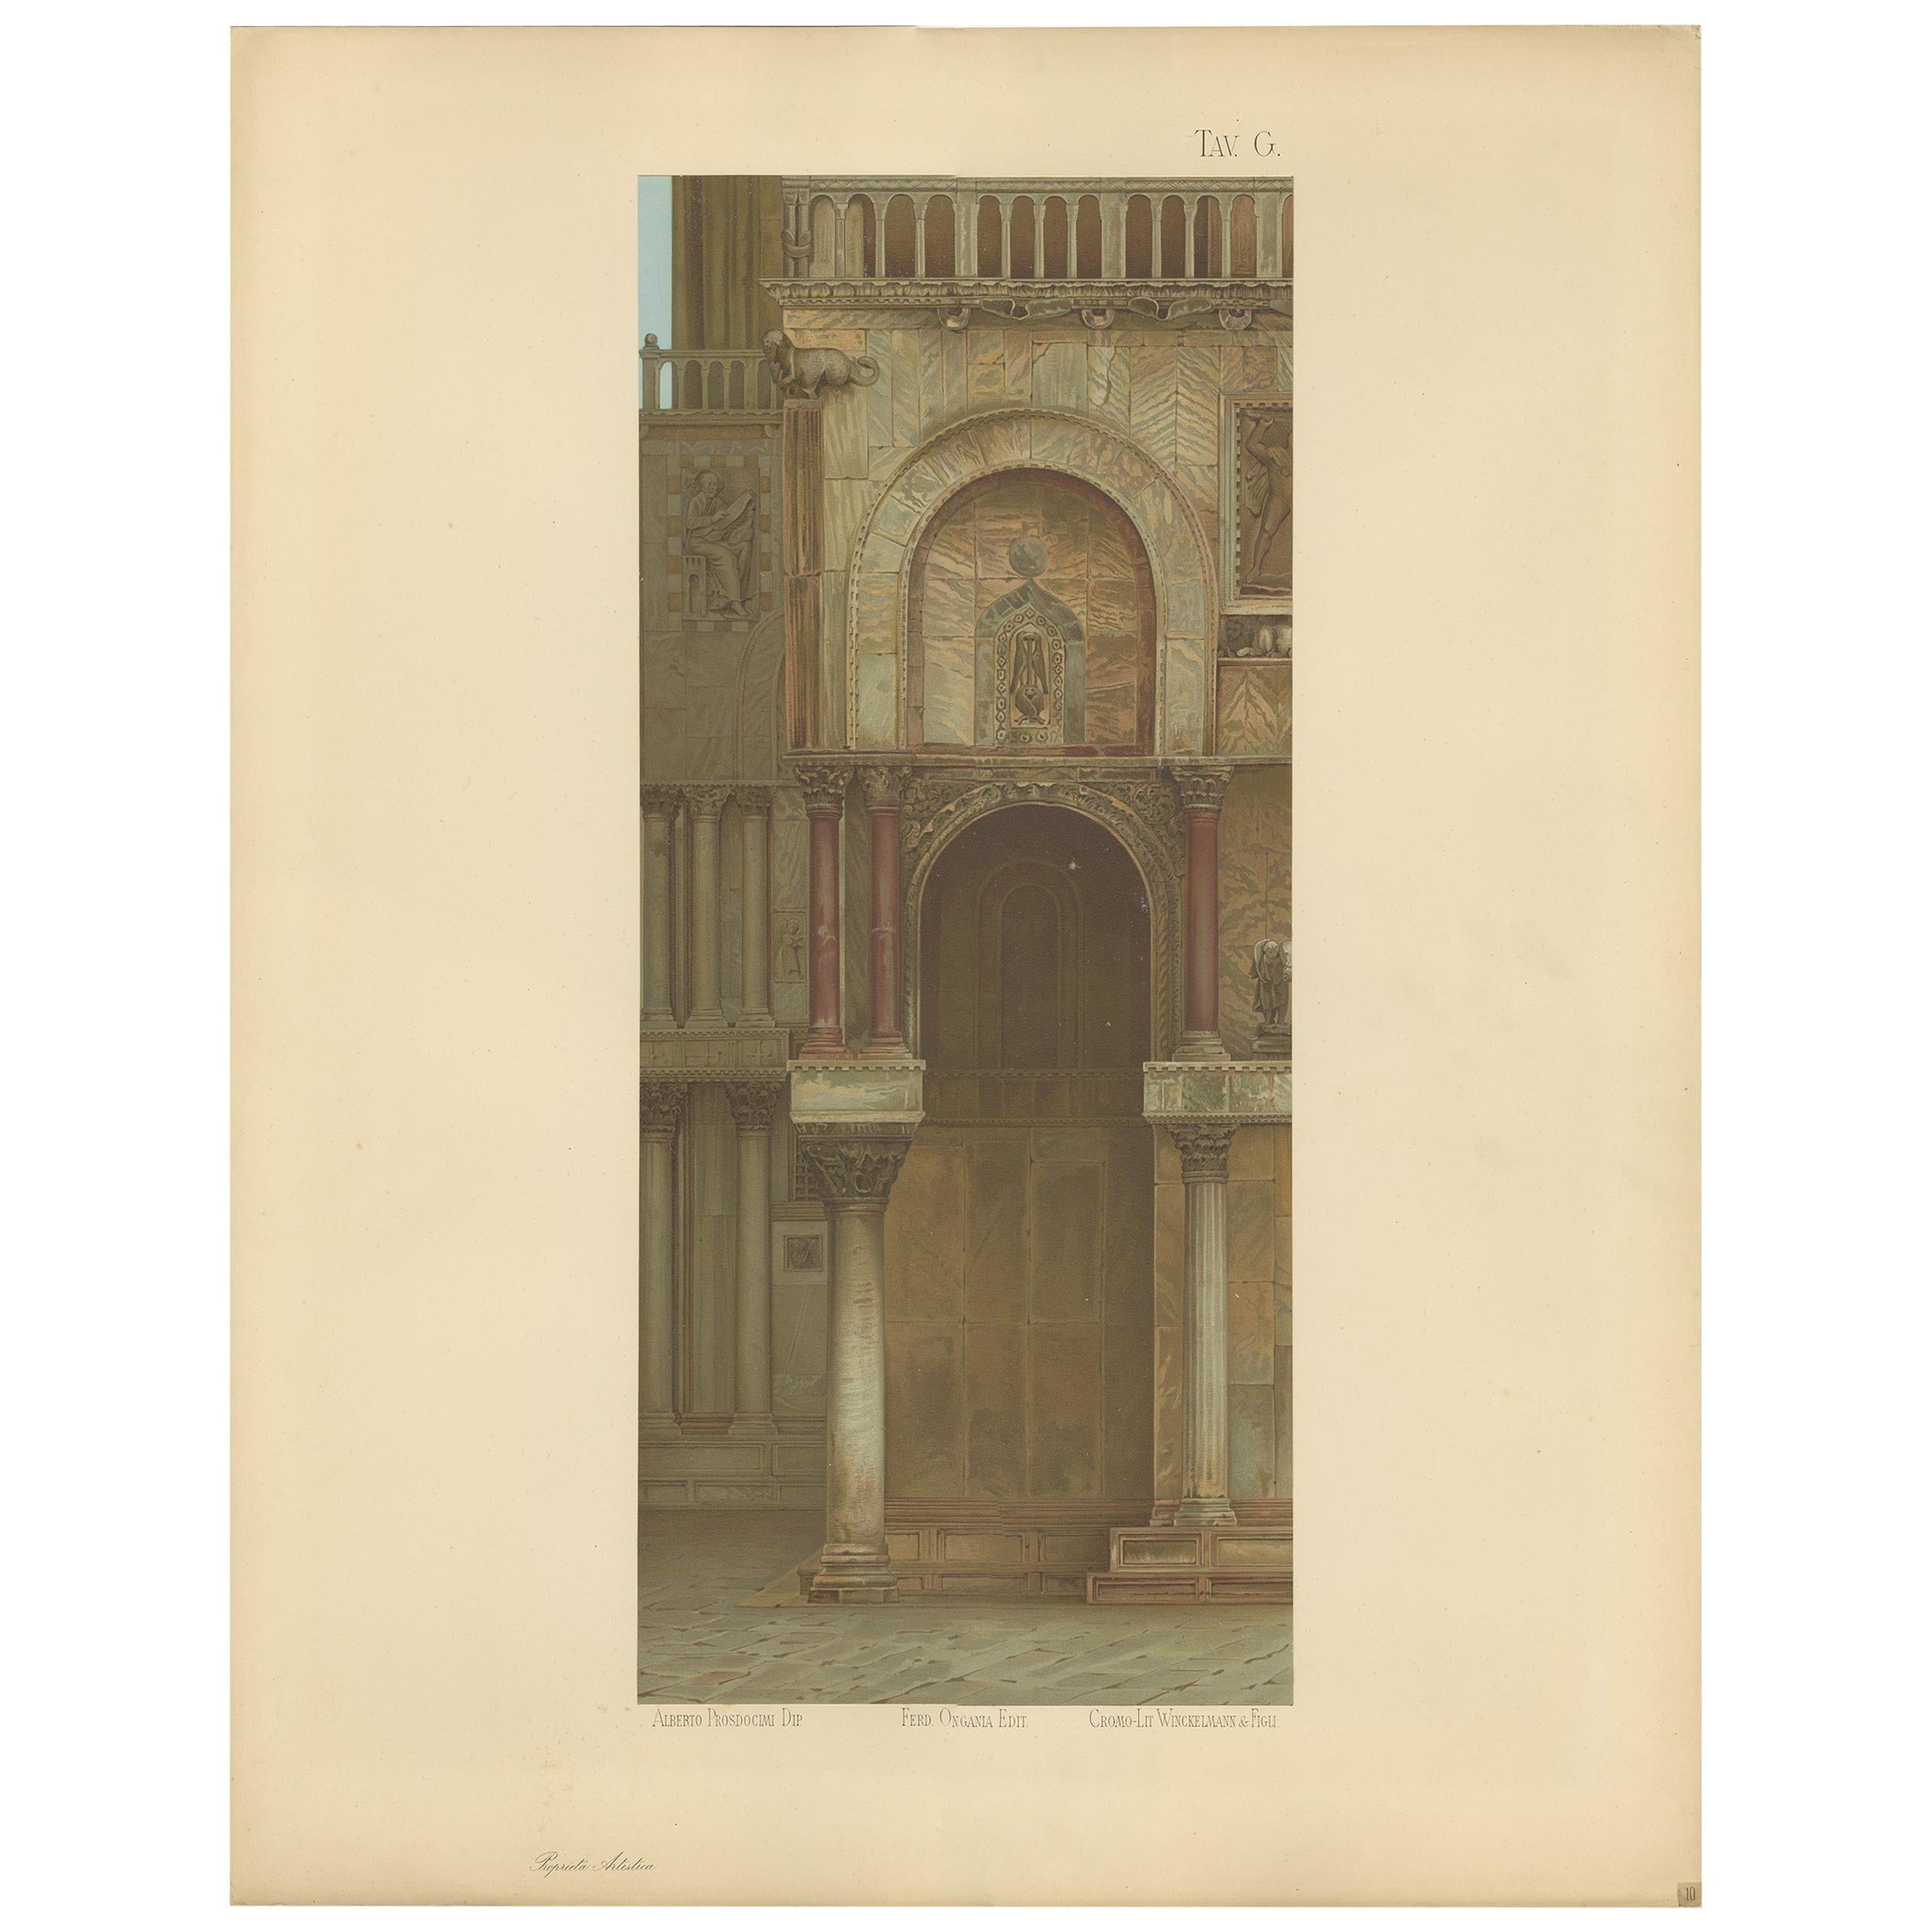 Pl. 10 Antique Print of the Main Facade of the Basilica of San Marco